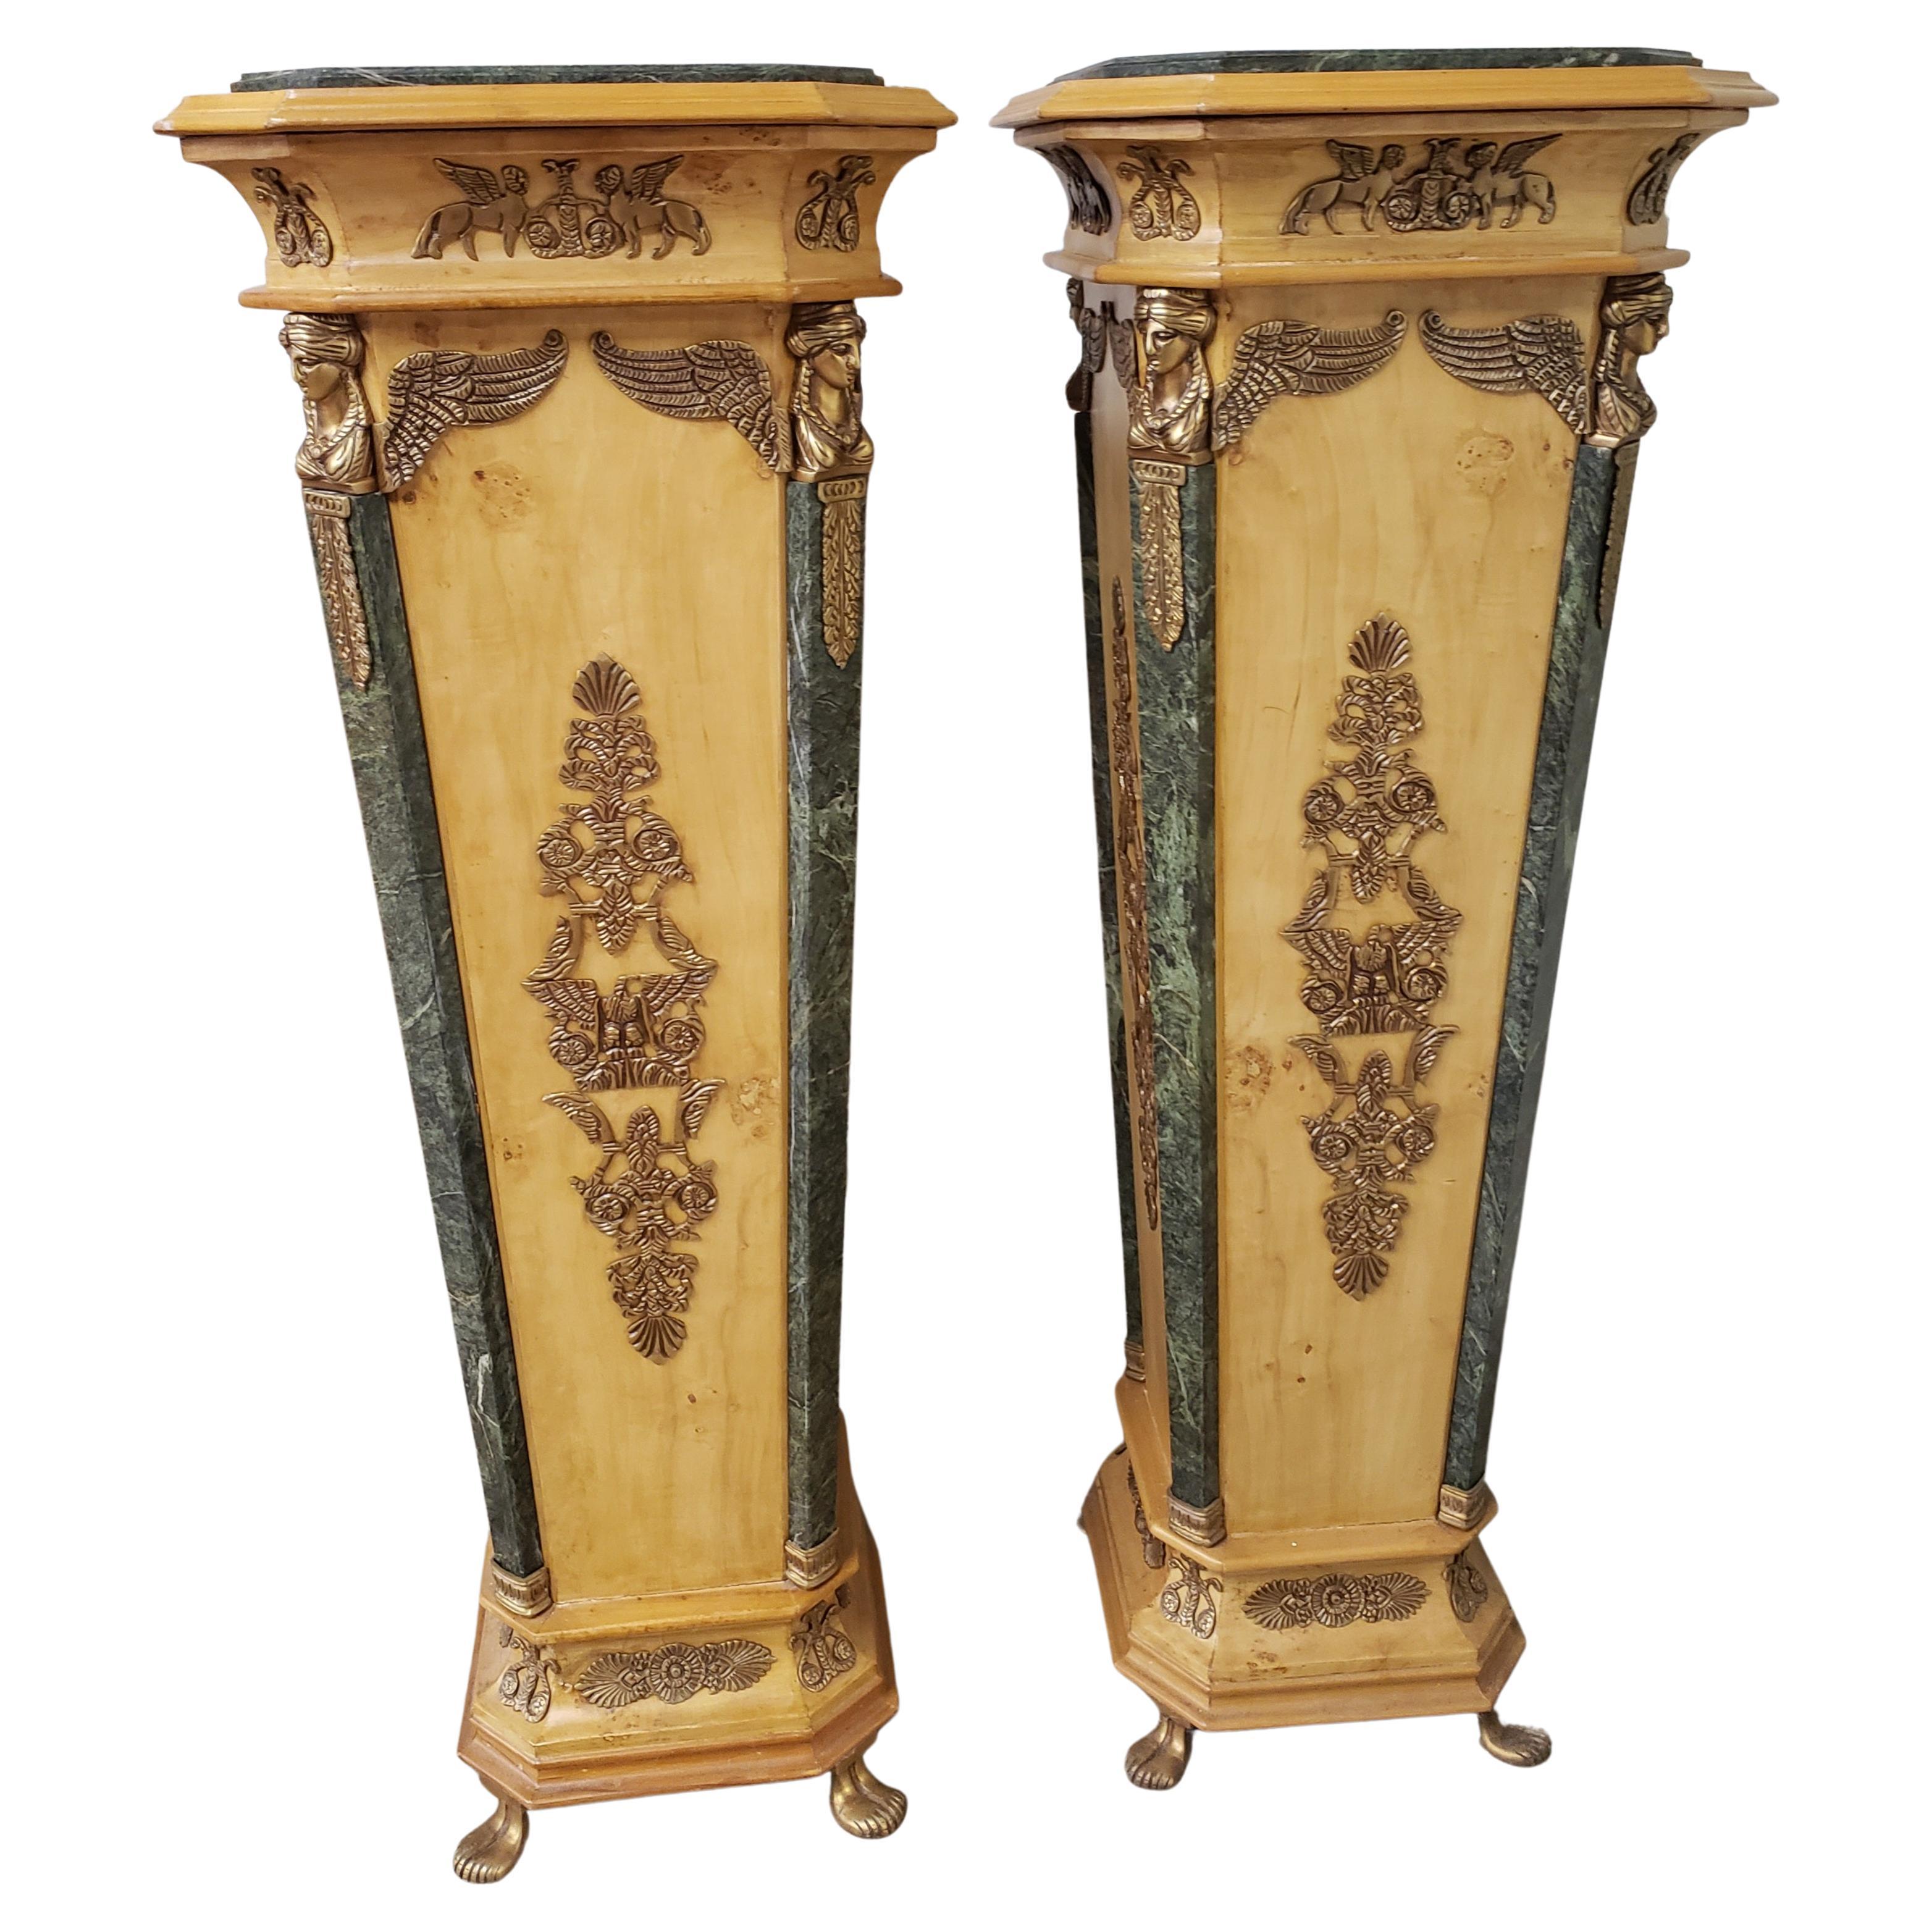 French Empire Gilt Bronze Ormolu Mottled Marble & Satinwood Pedestals, a Pair For Sale